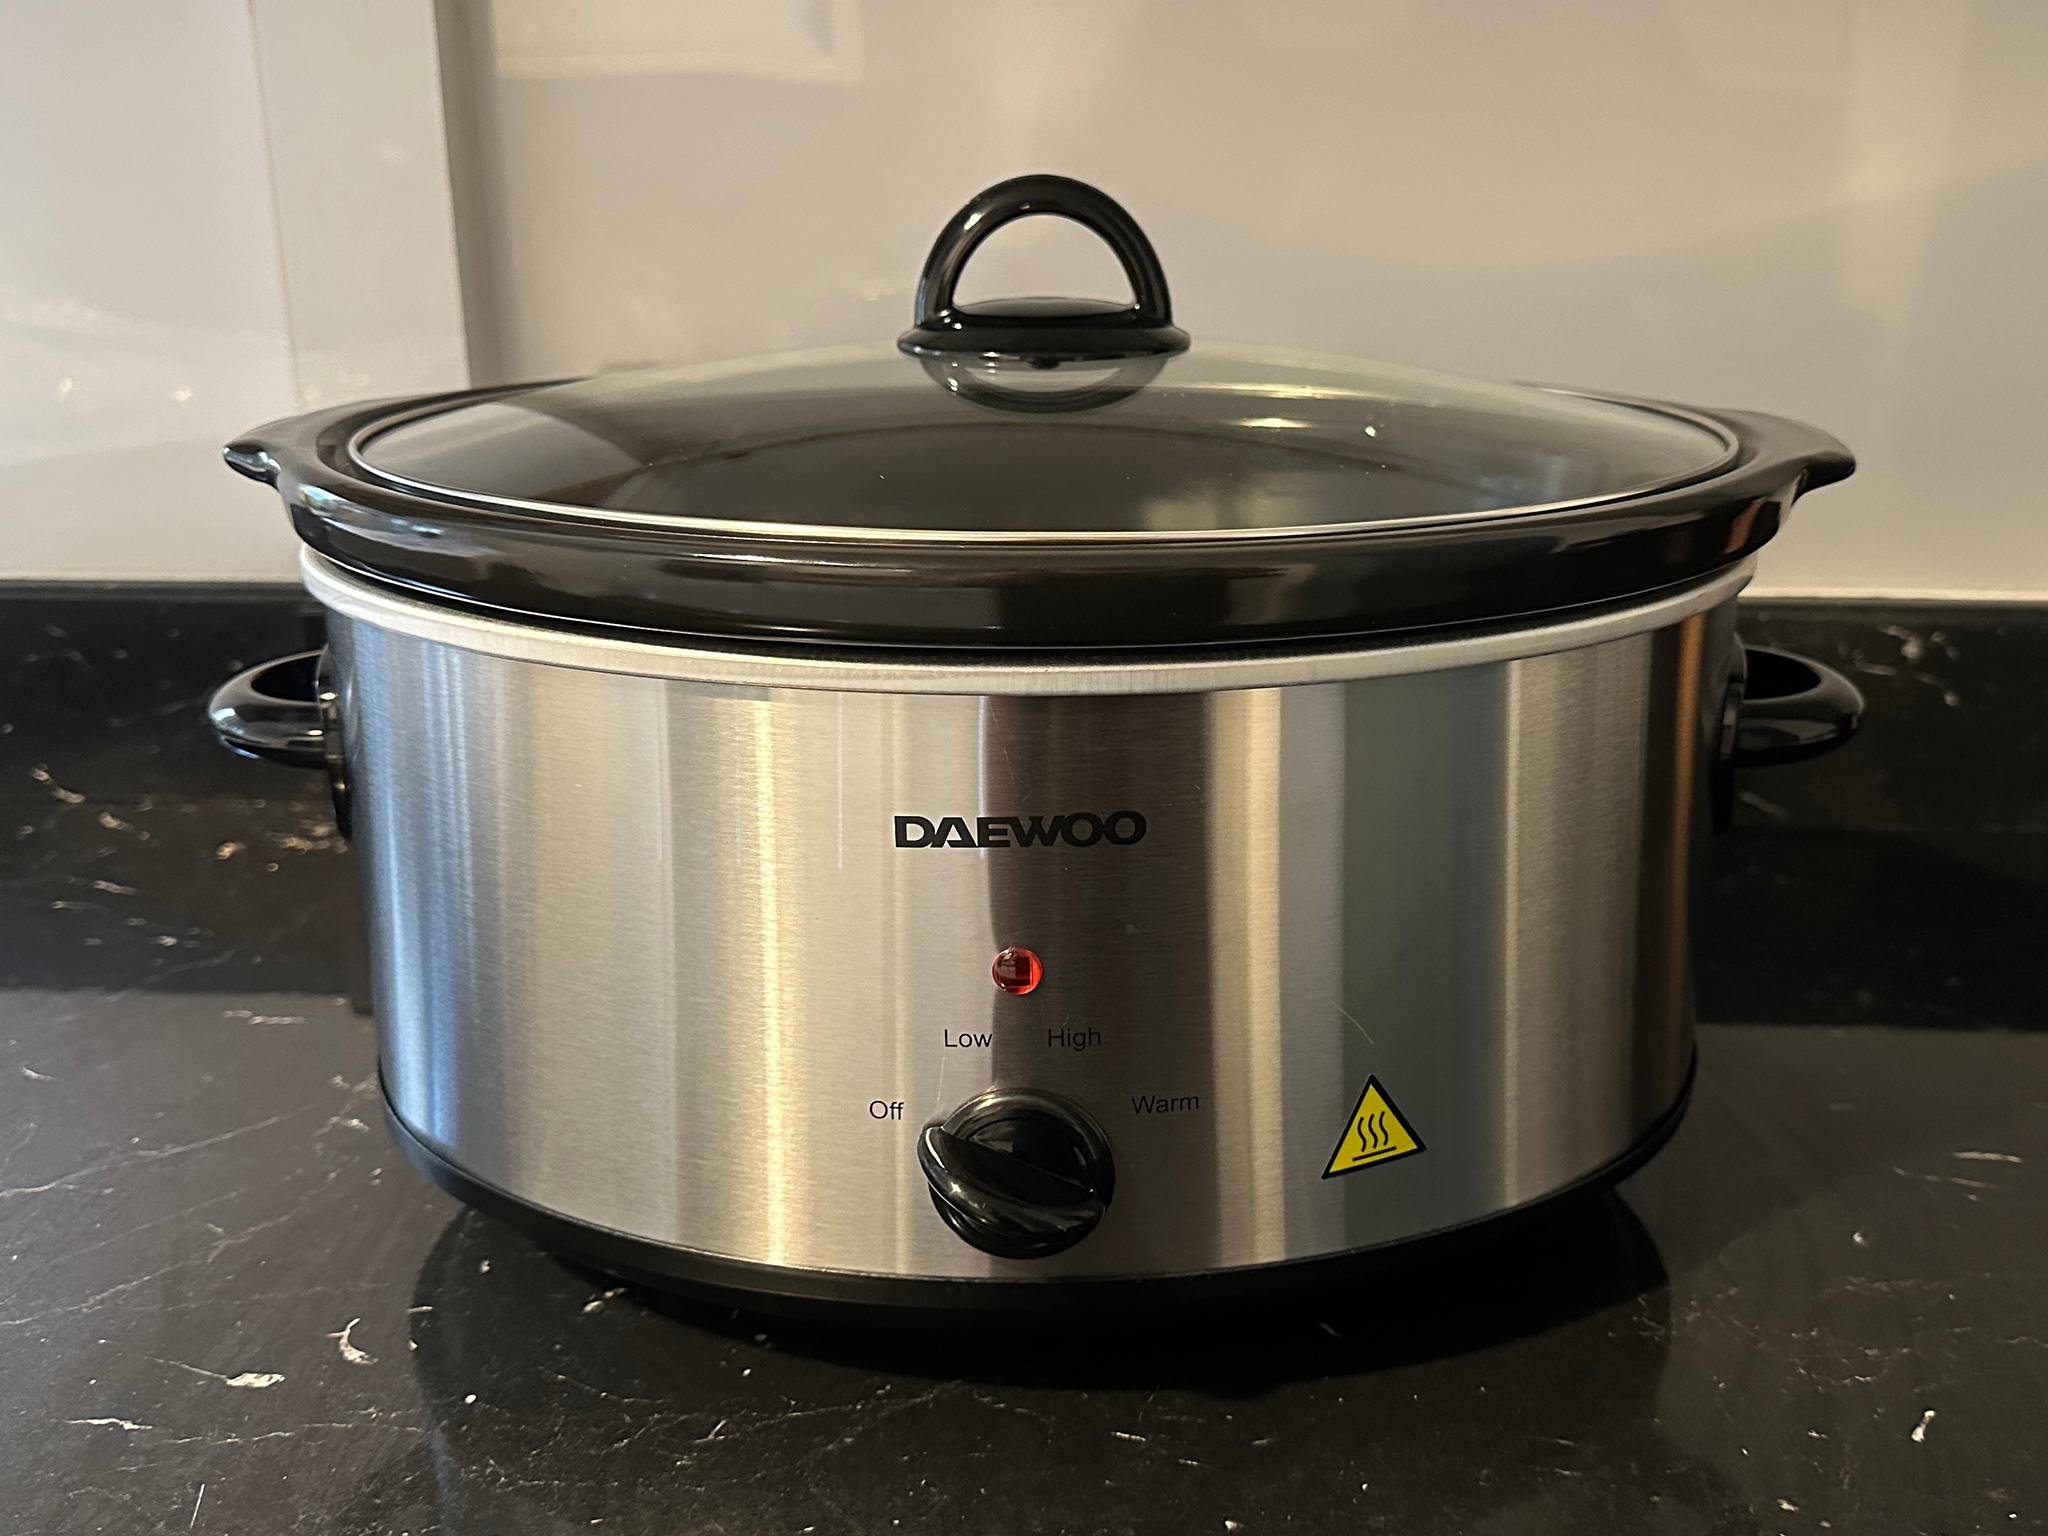 https://static.independent.co.uk/2023/12/04/17/Daewoo%206.5l%20slow%20cooker.png